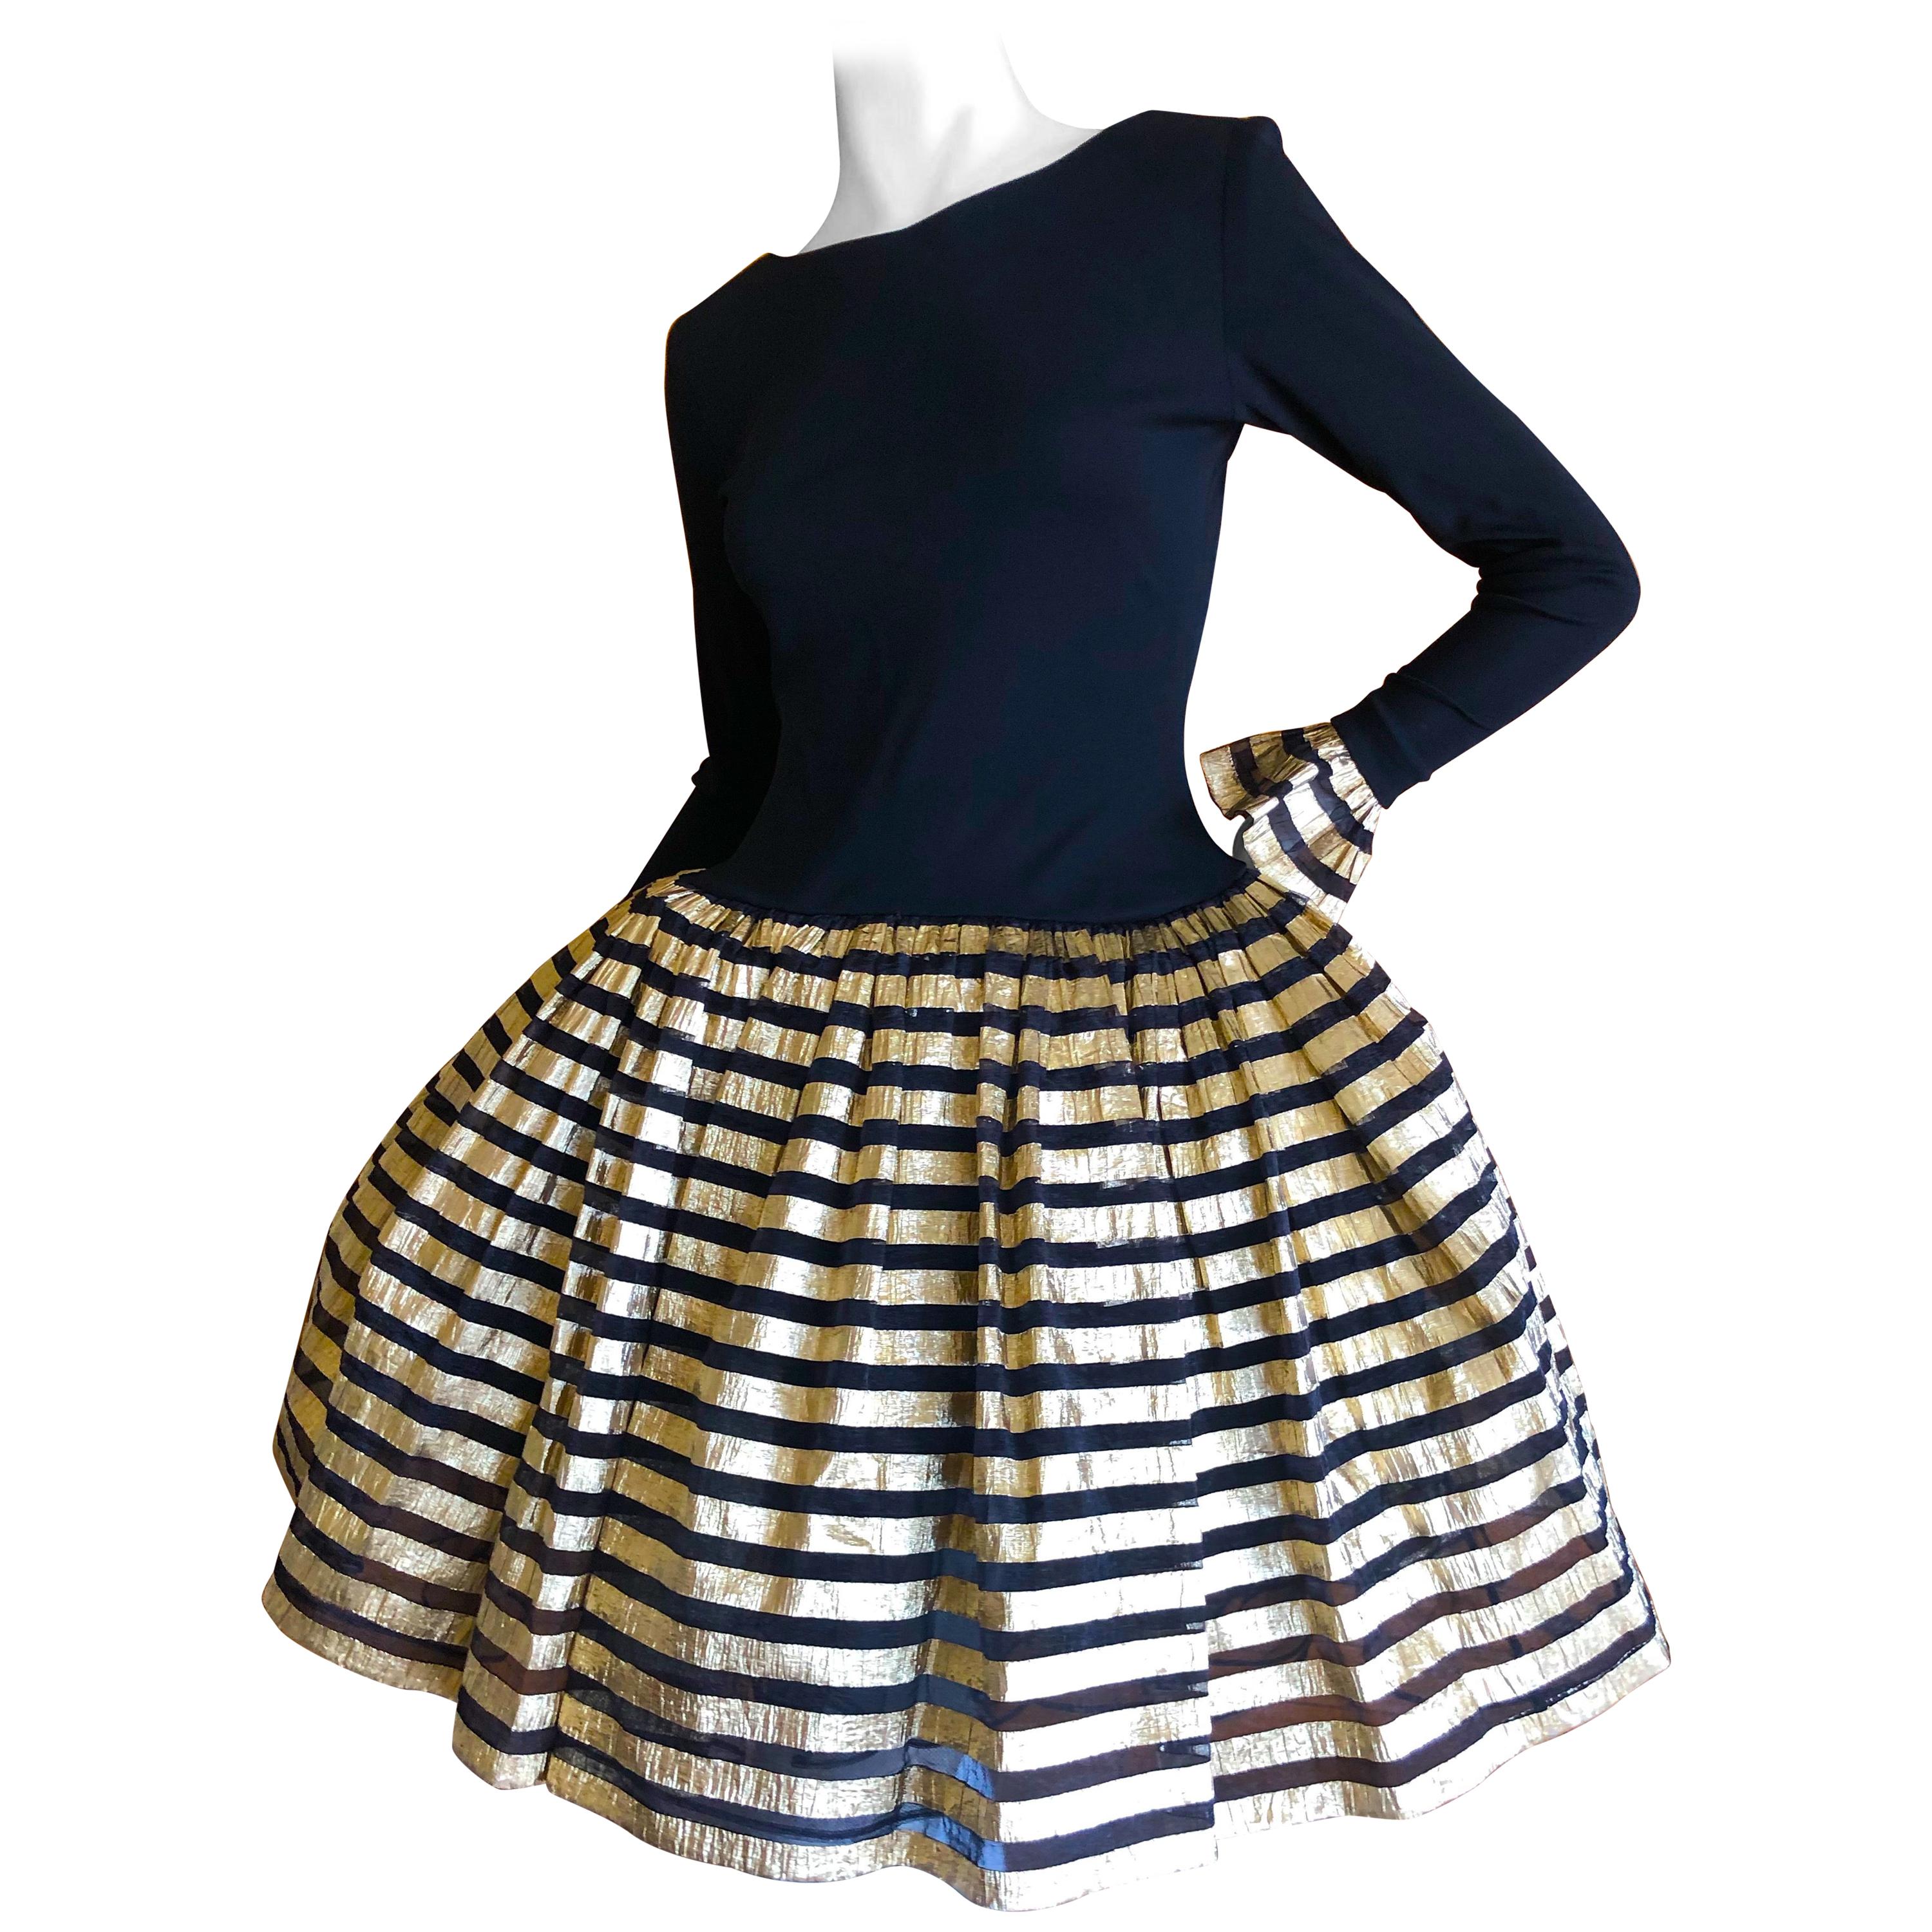 Bob Mackie Gold and Black Vintage Cocktail Dress w Ballerina Skirt & Petticoats For Sale